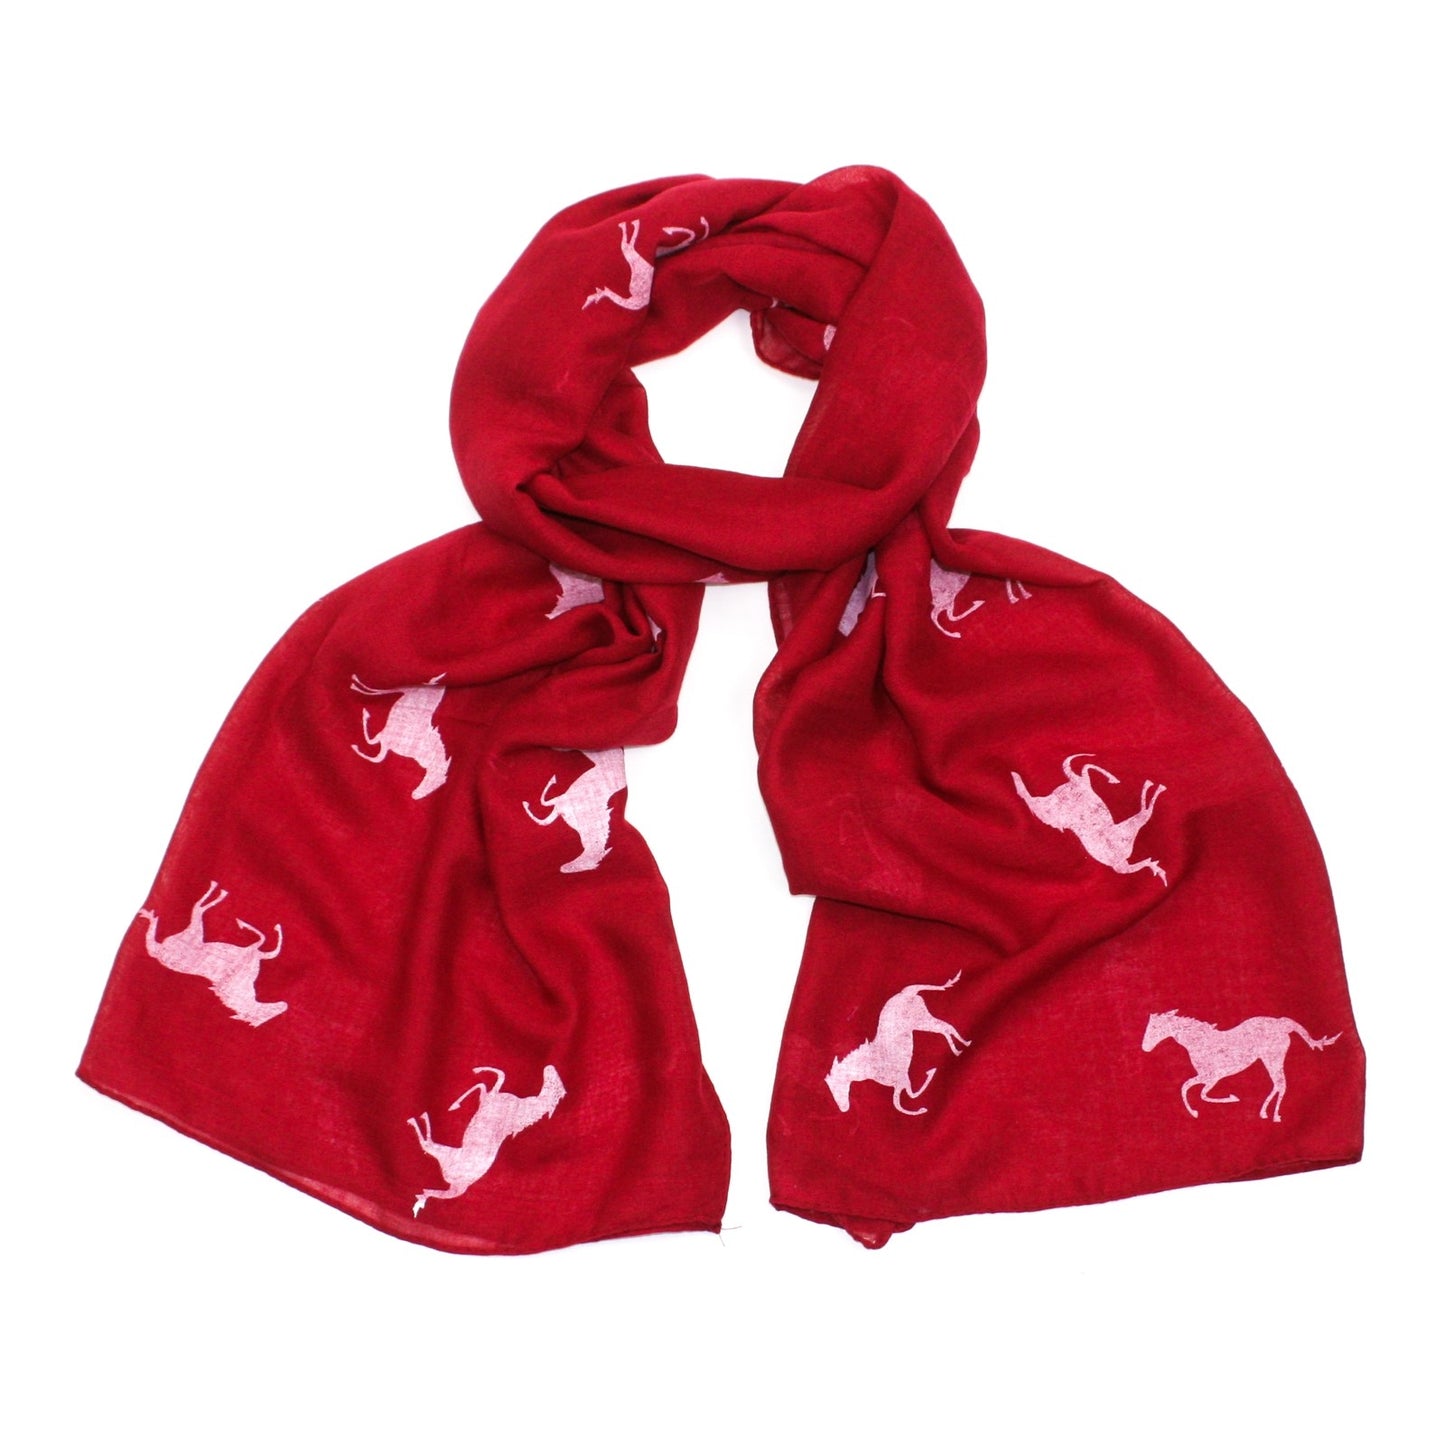 Red scarf with a galloping horse print and a rolled edge.